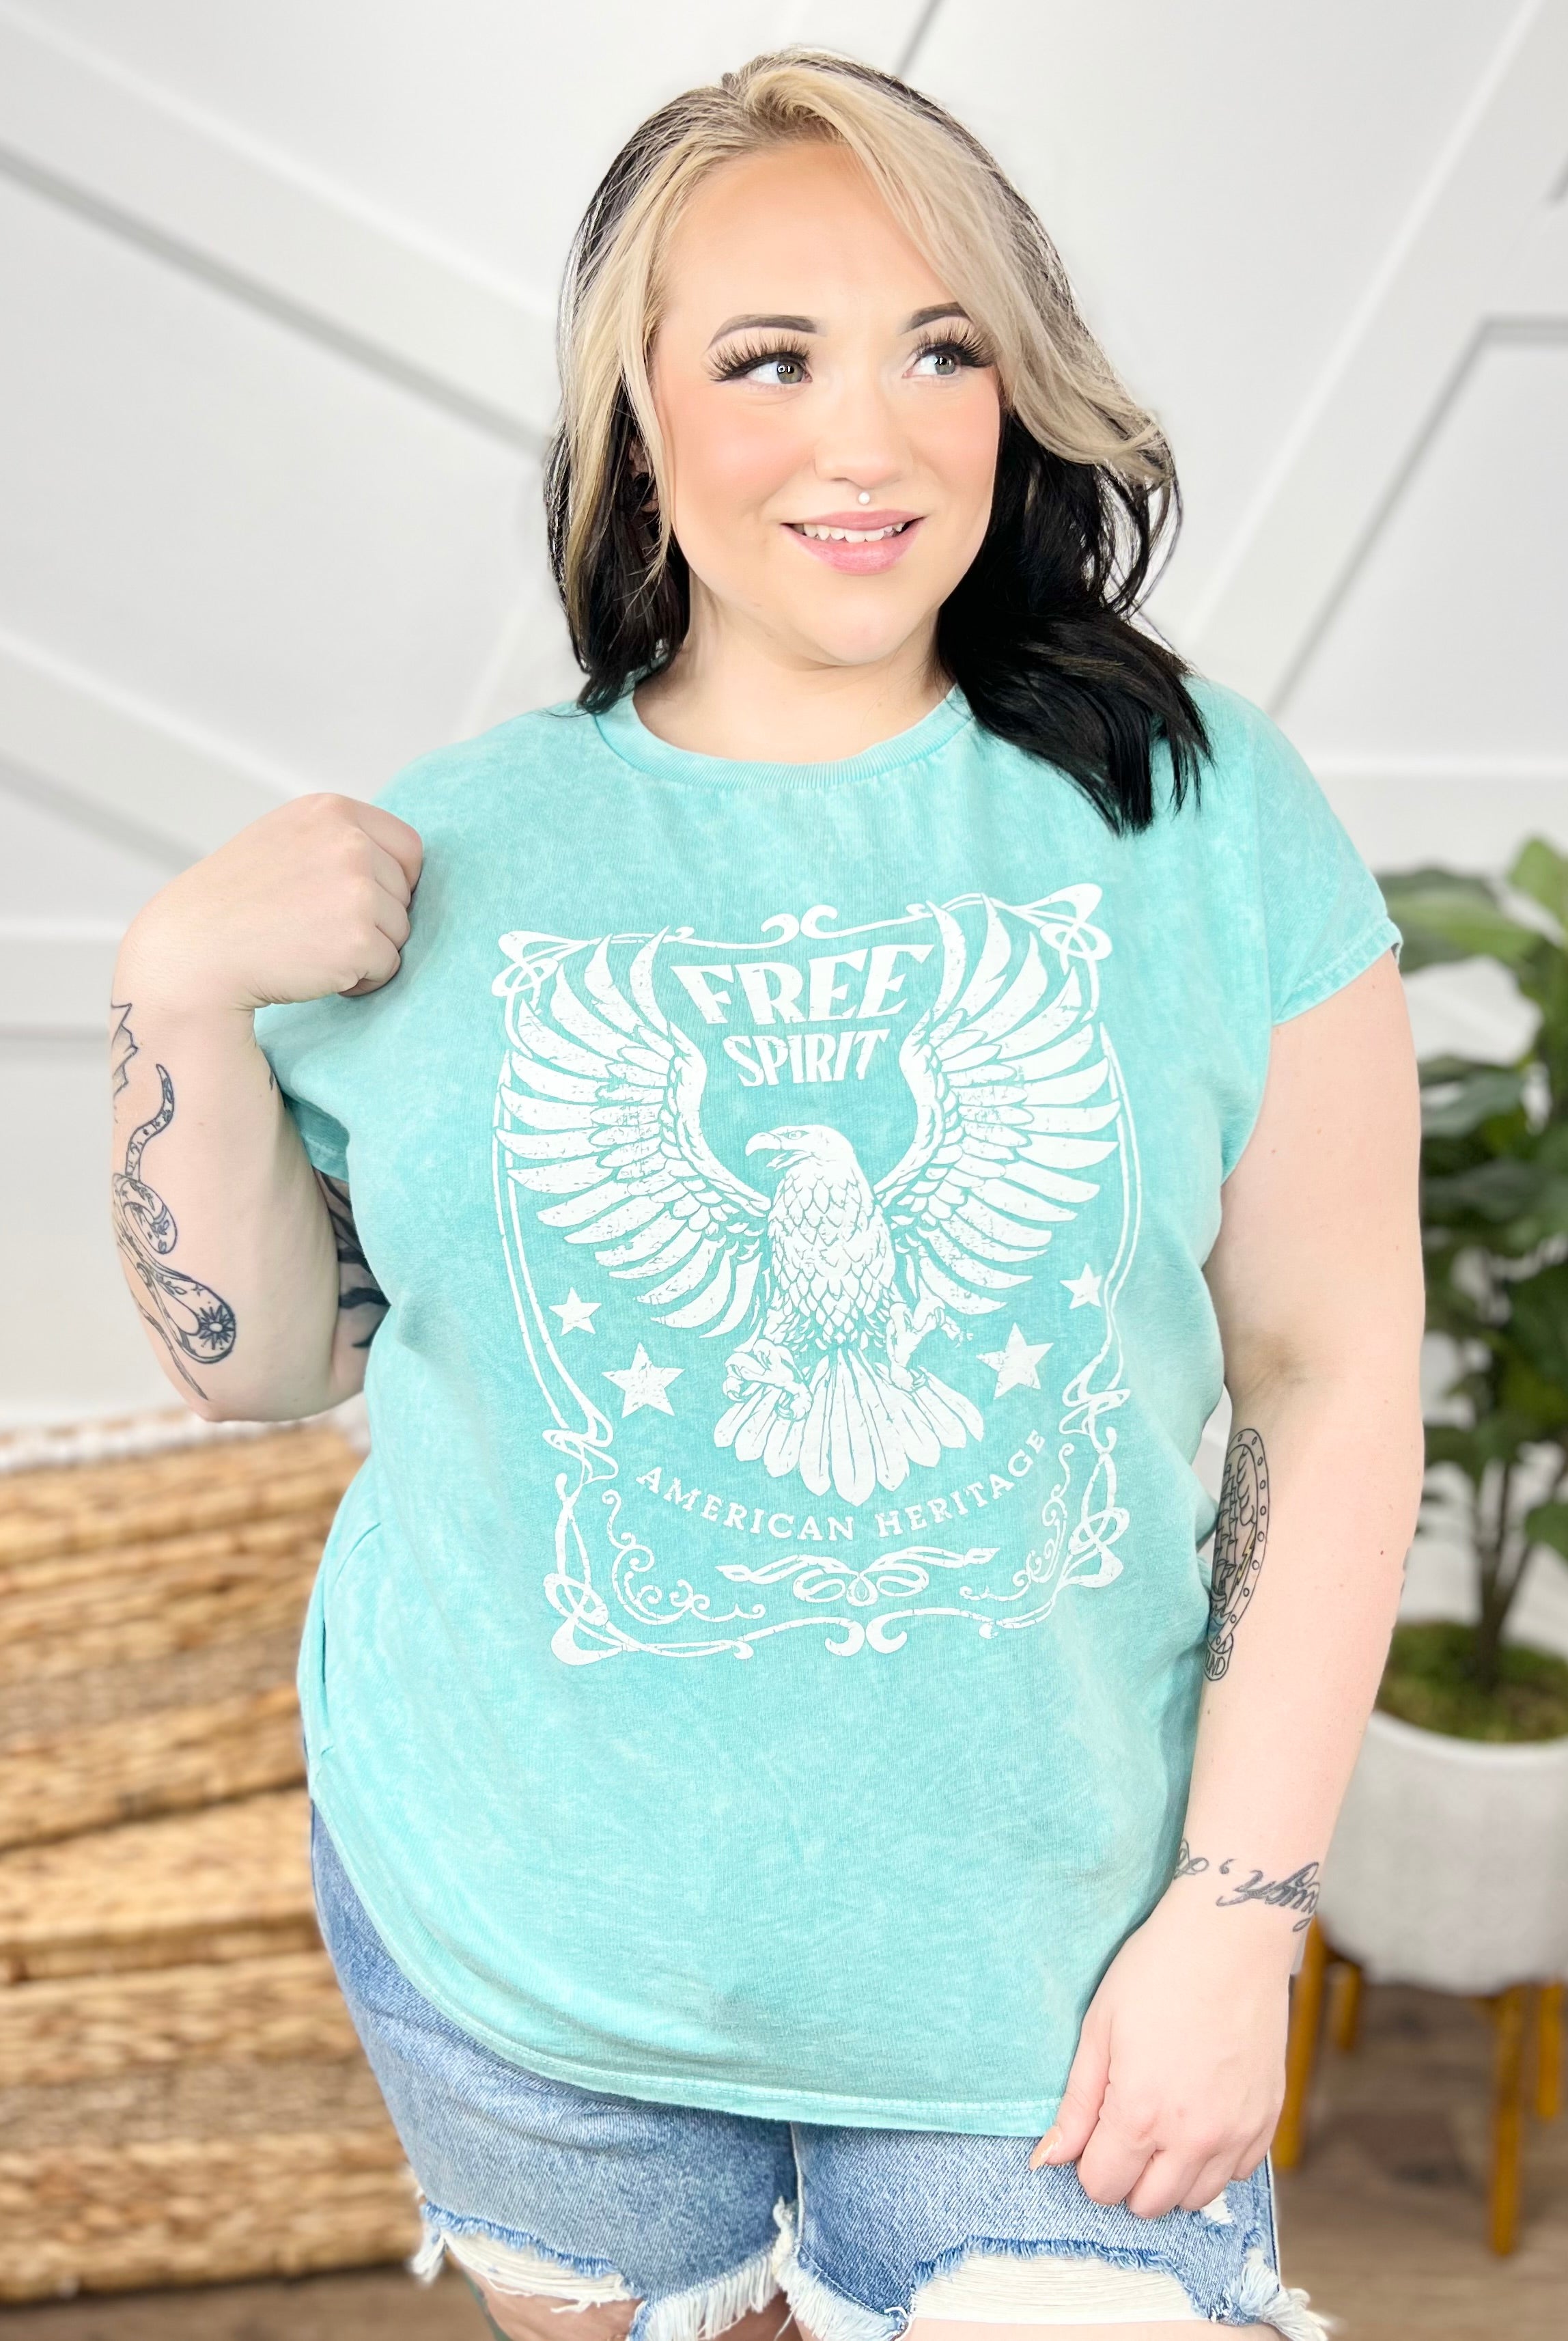 Free Spirit Graphic Tee-110 Short Sleeve Top-J. Her-Heathered Boho Boutique, Women's Fashion and Accessories in Palmetto, FL